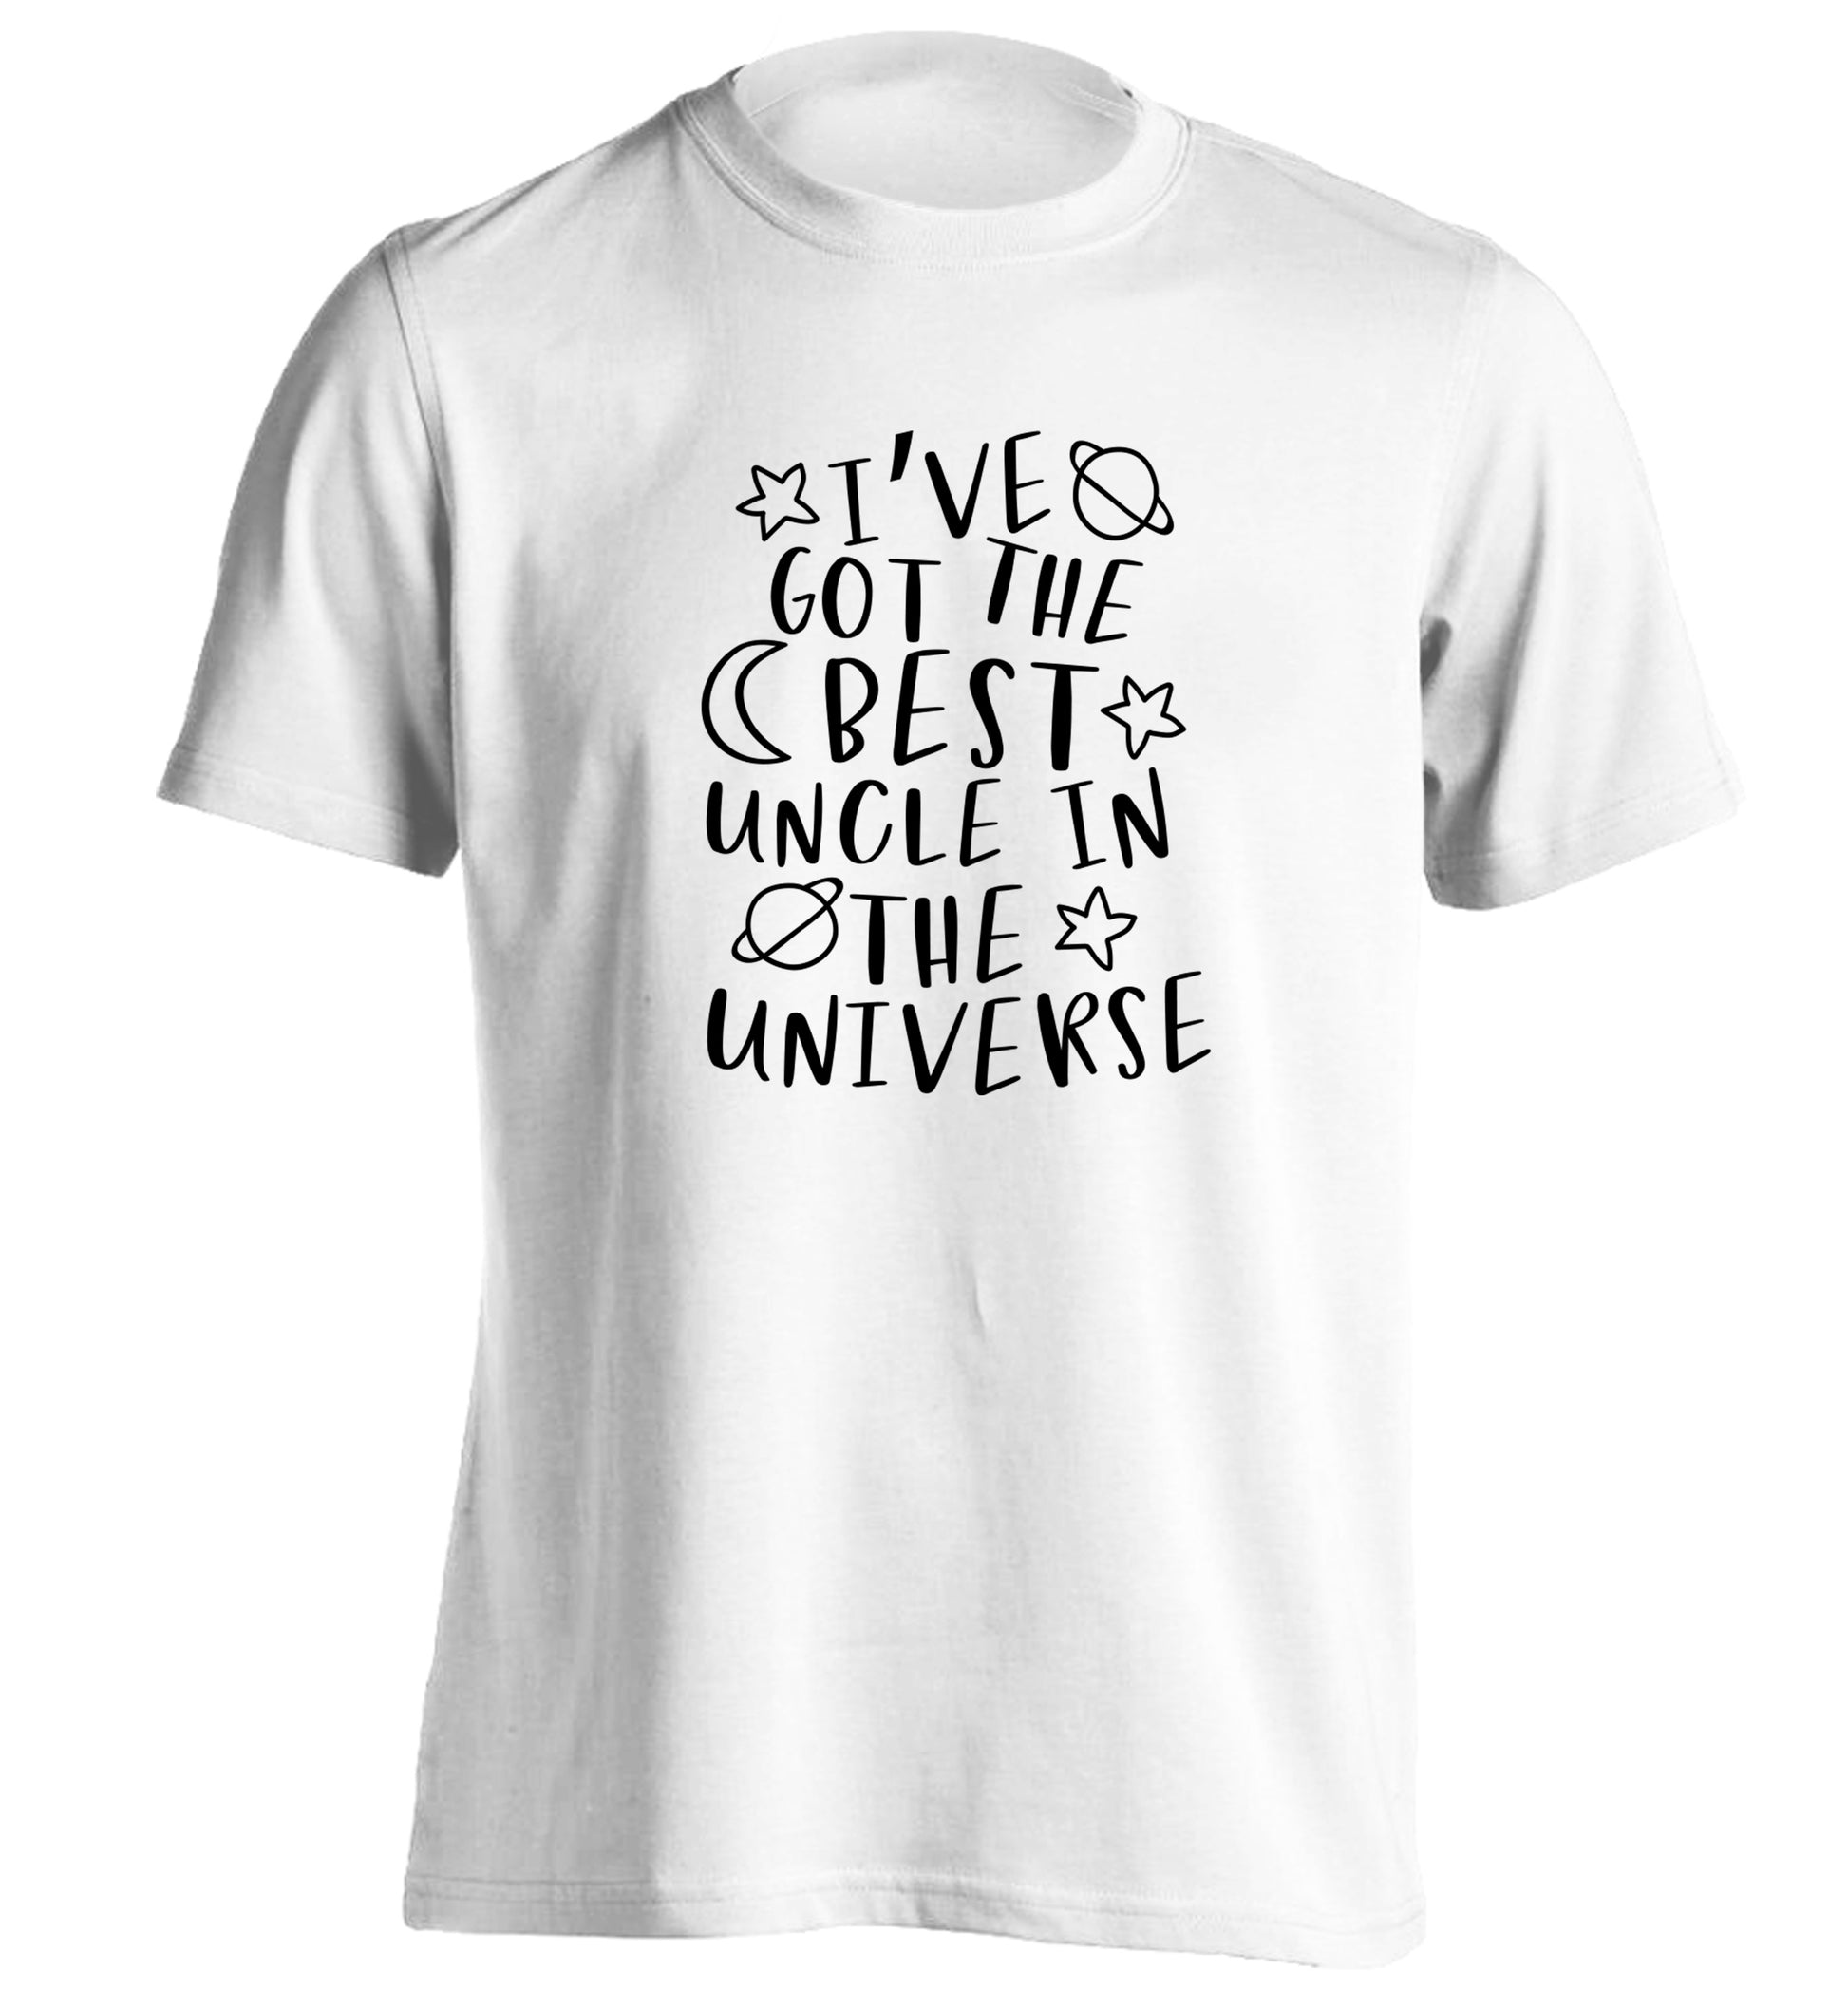 I've got the best uncle in the universe adults unisex white Tshirt 2XL